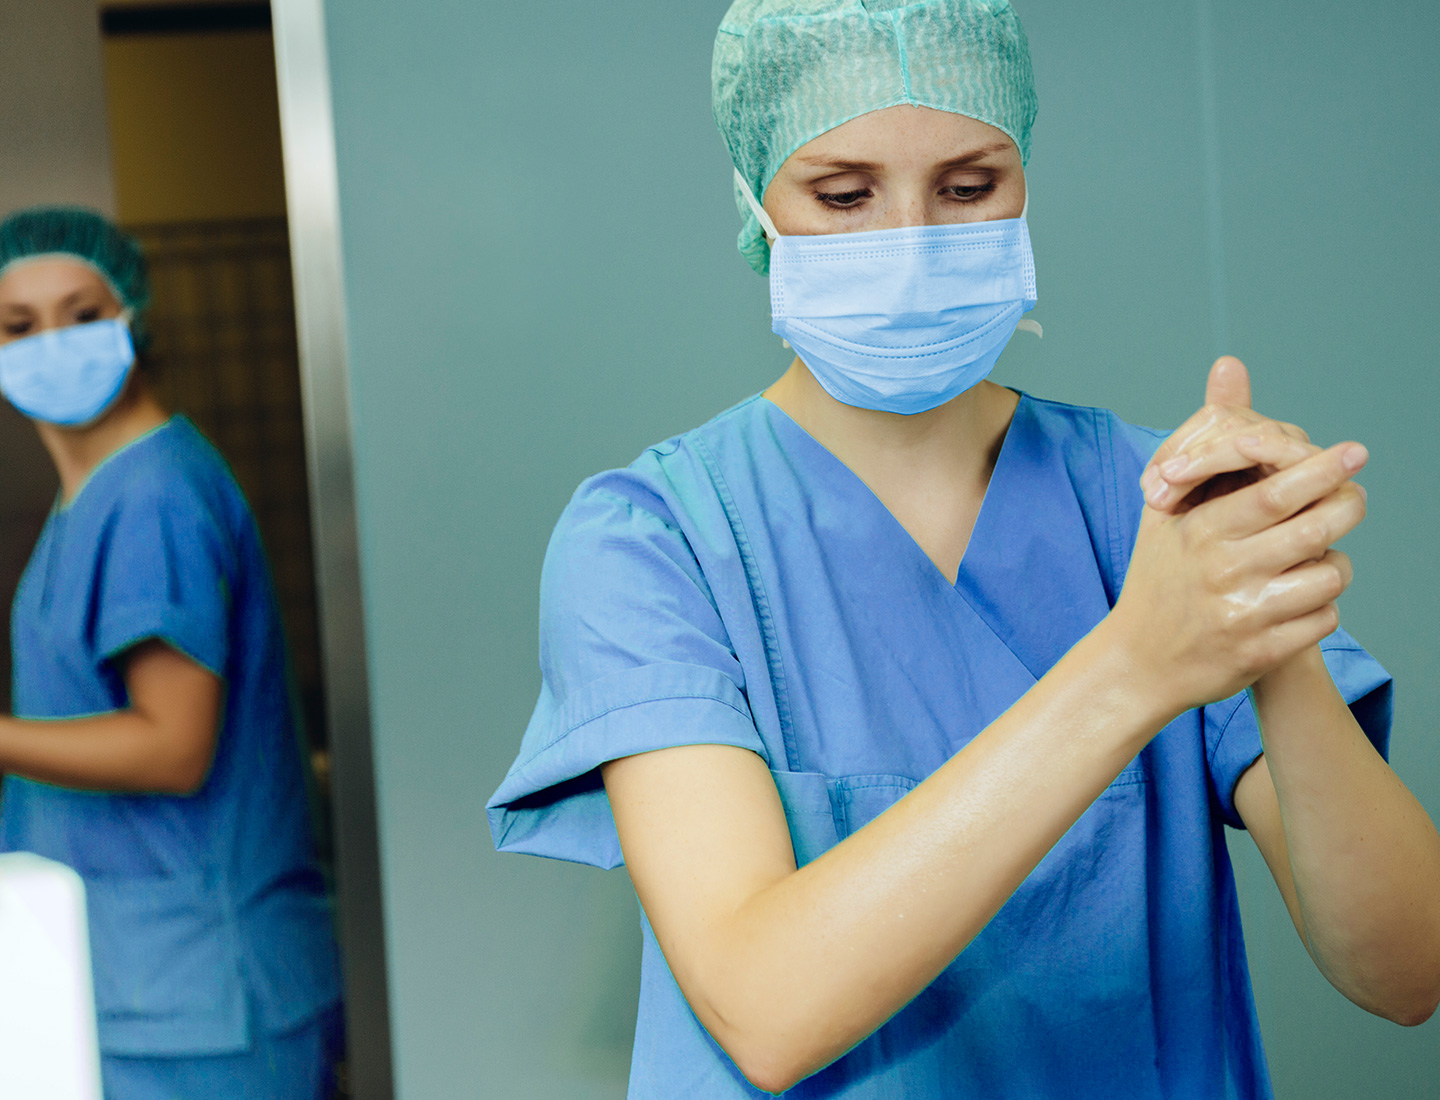 A surgeon disinfects her hands before an operation.